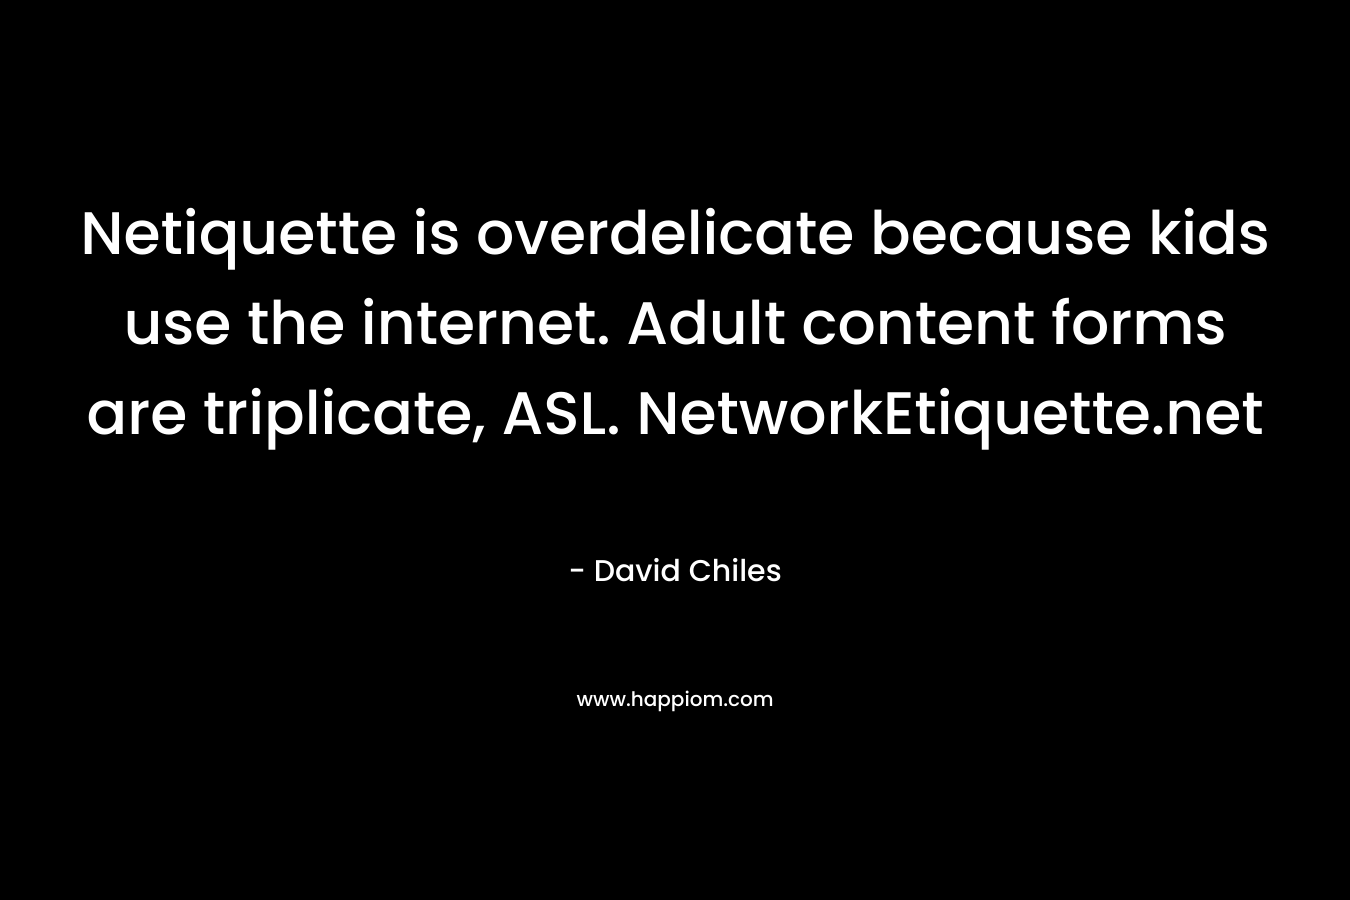 Netiquette is overdelicate because kids use the internet. Adult content forms are triplicate, ASL. NetworkEtiquette.net